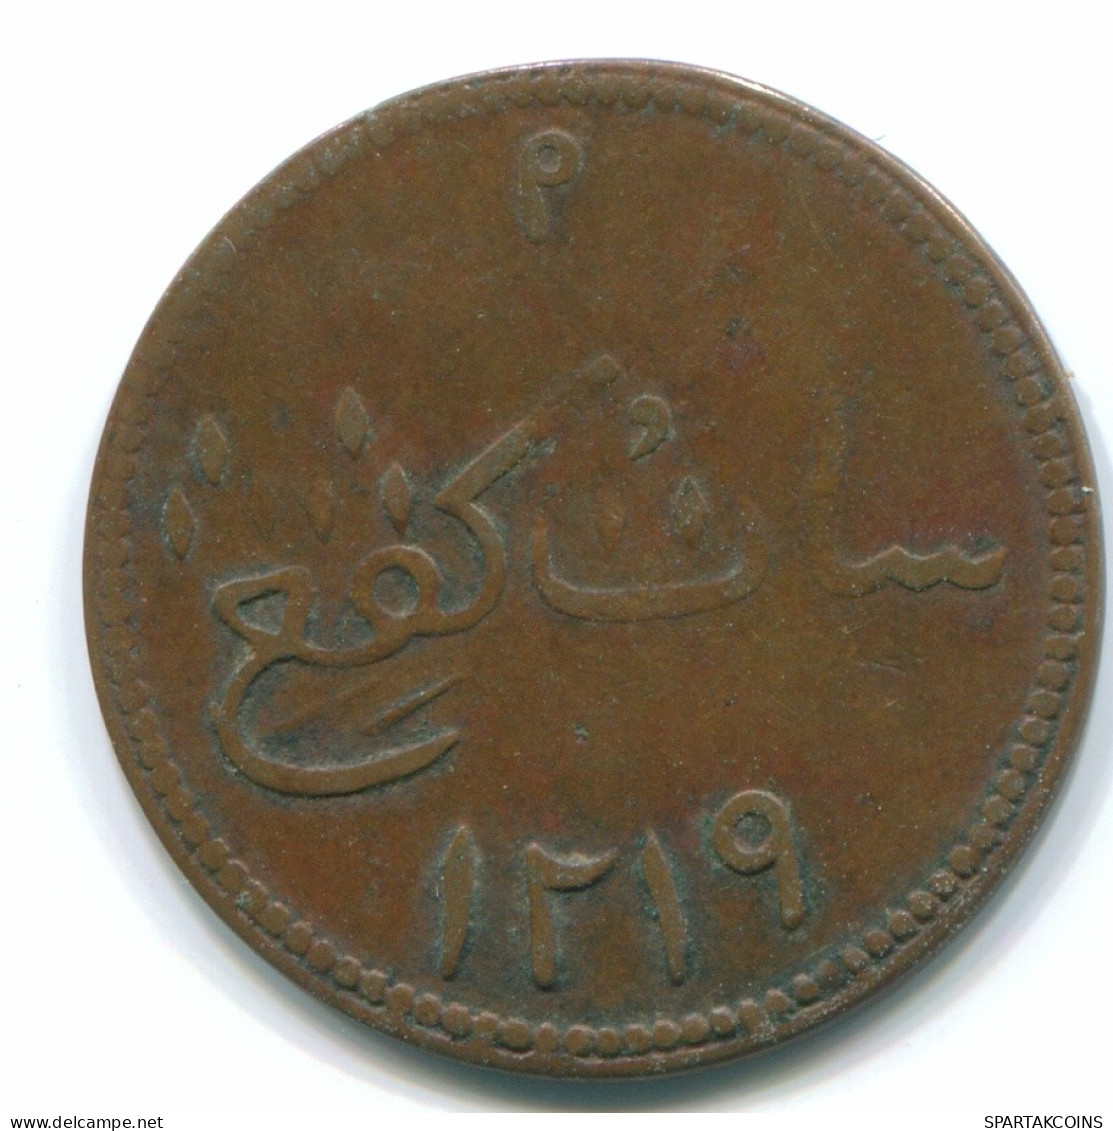 1 KEPING 1804 SUMATRA BRITISH EAST INDIES Copper Colonial Coin #S11748.U.A - Indien